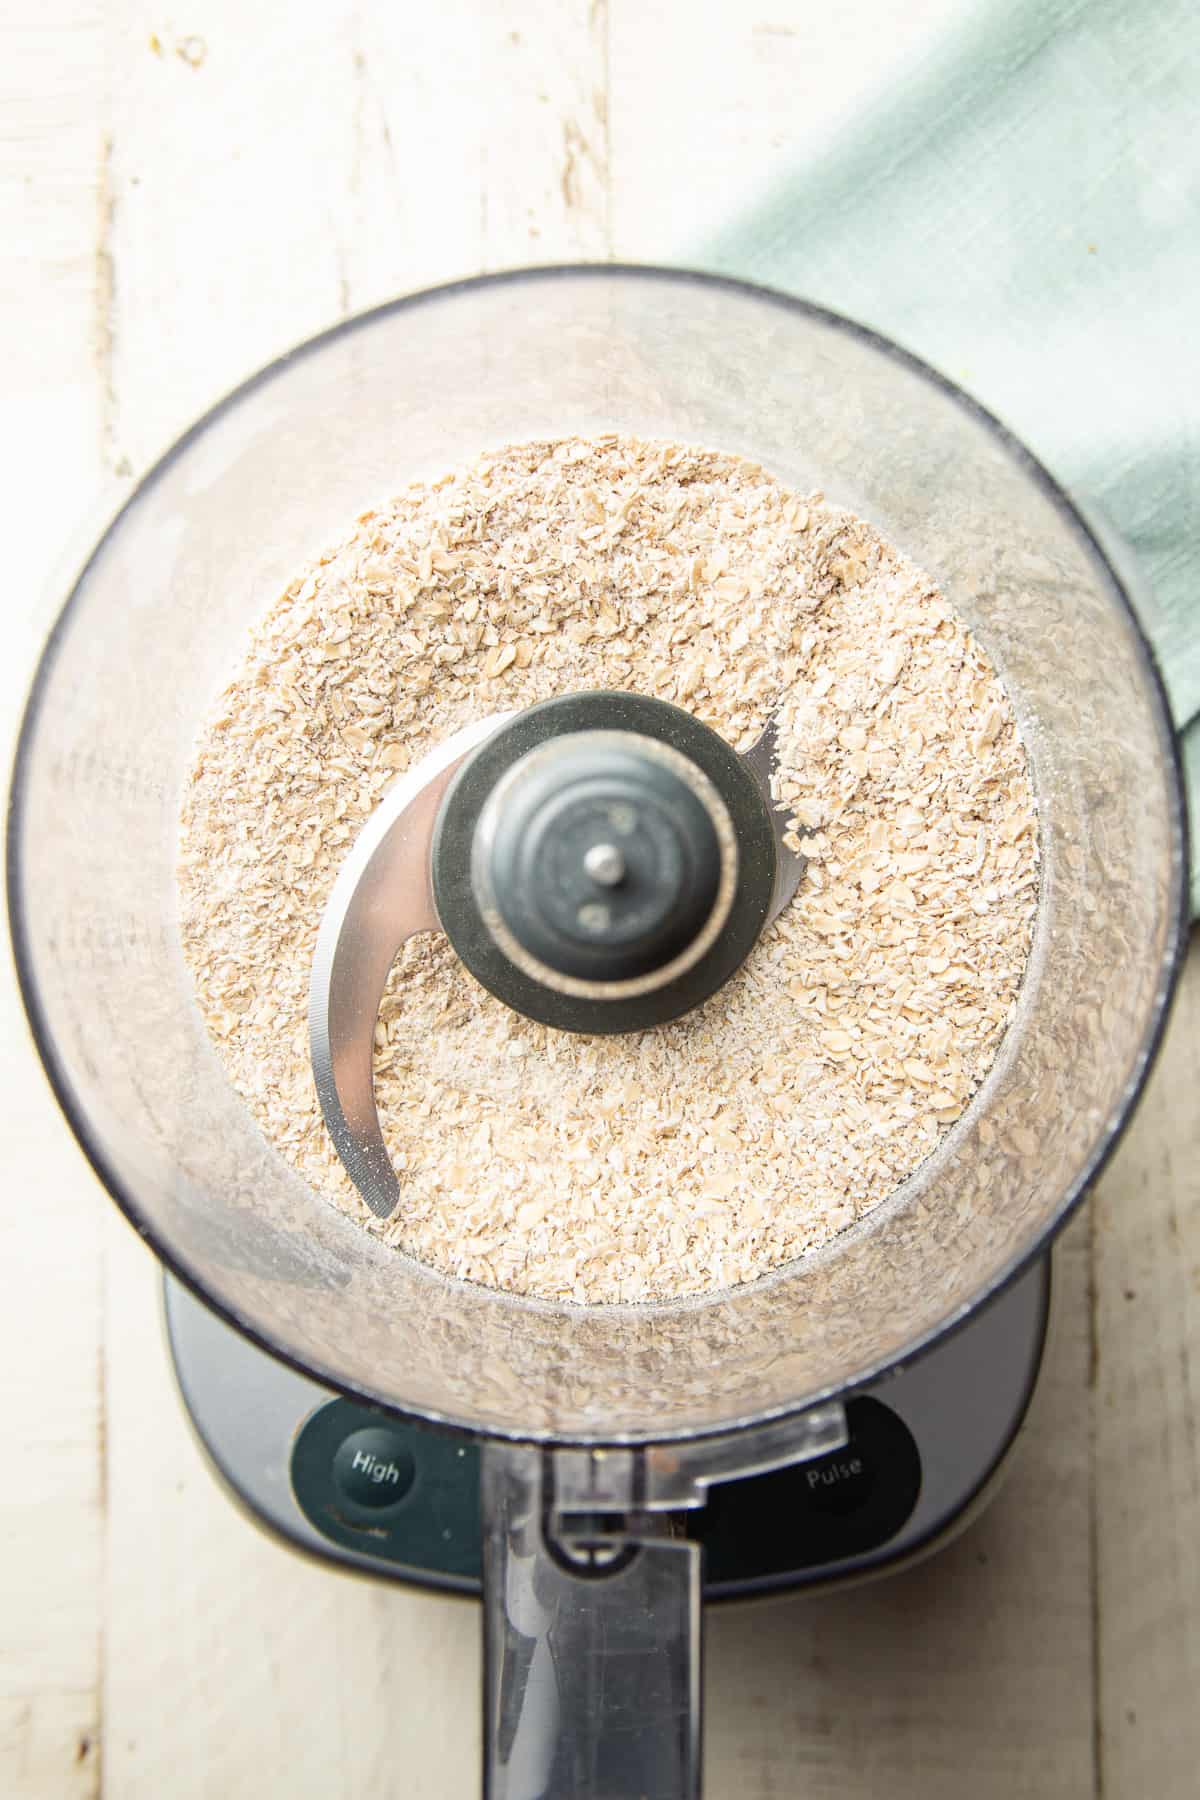 Ground oats in a food processor bowl.